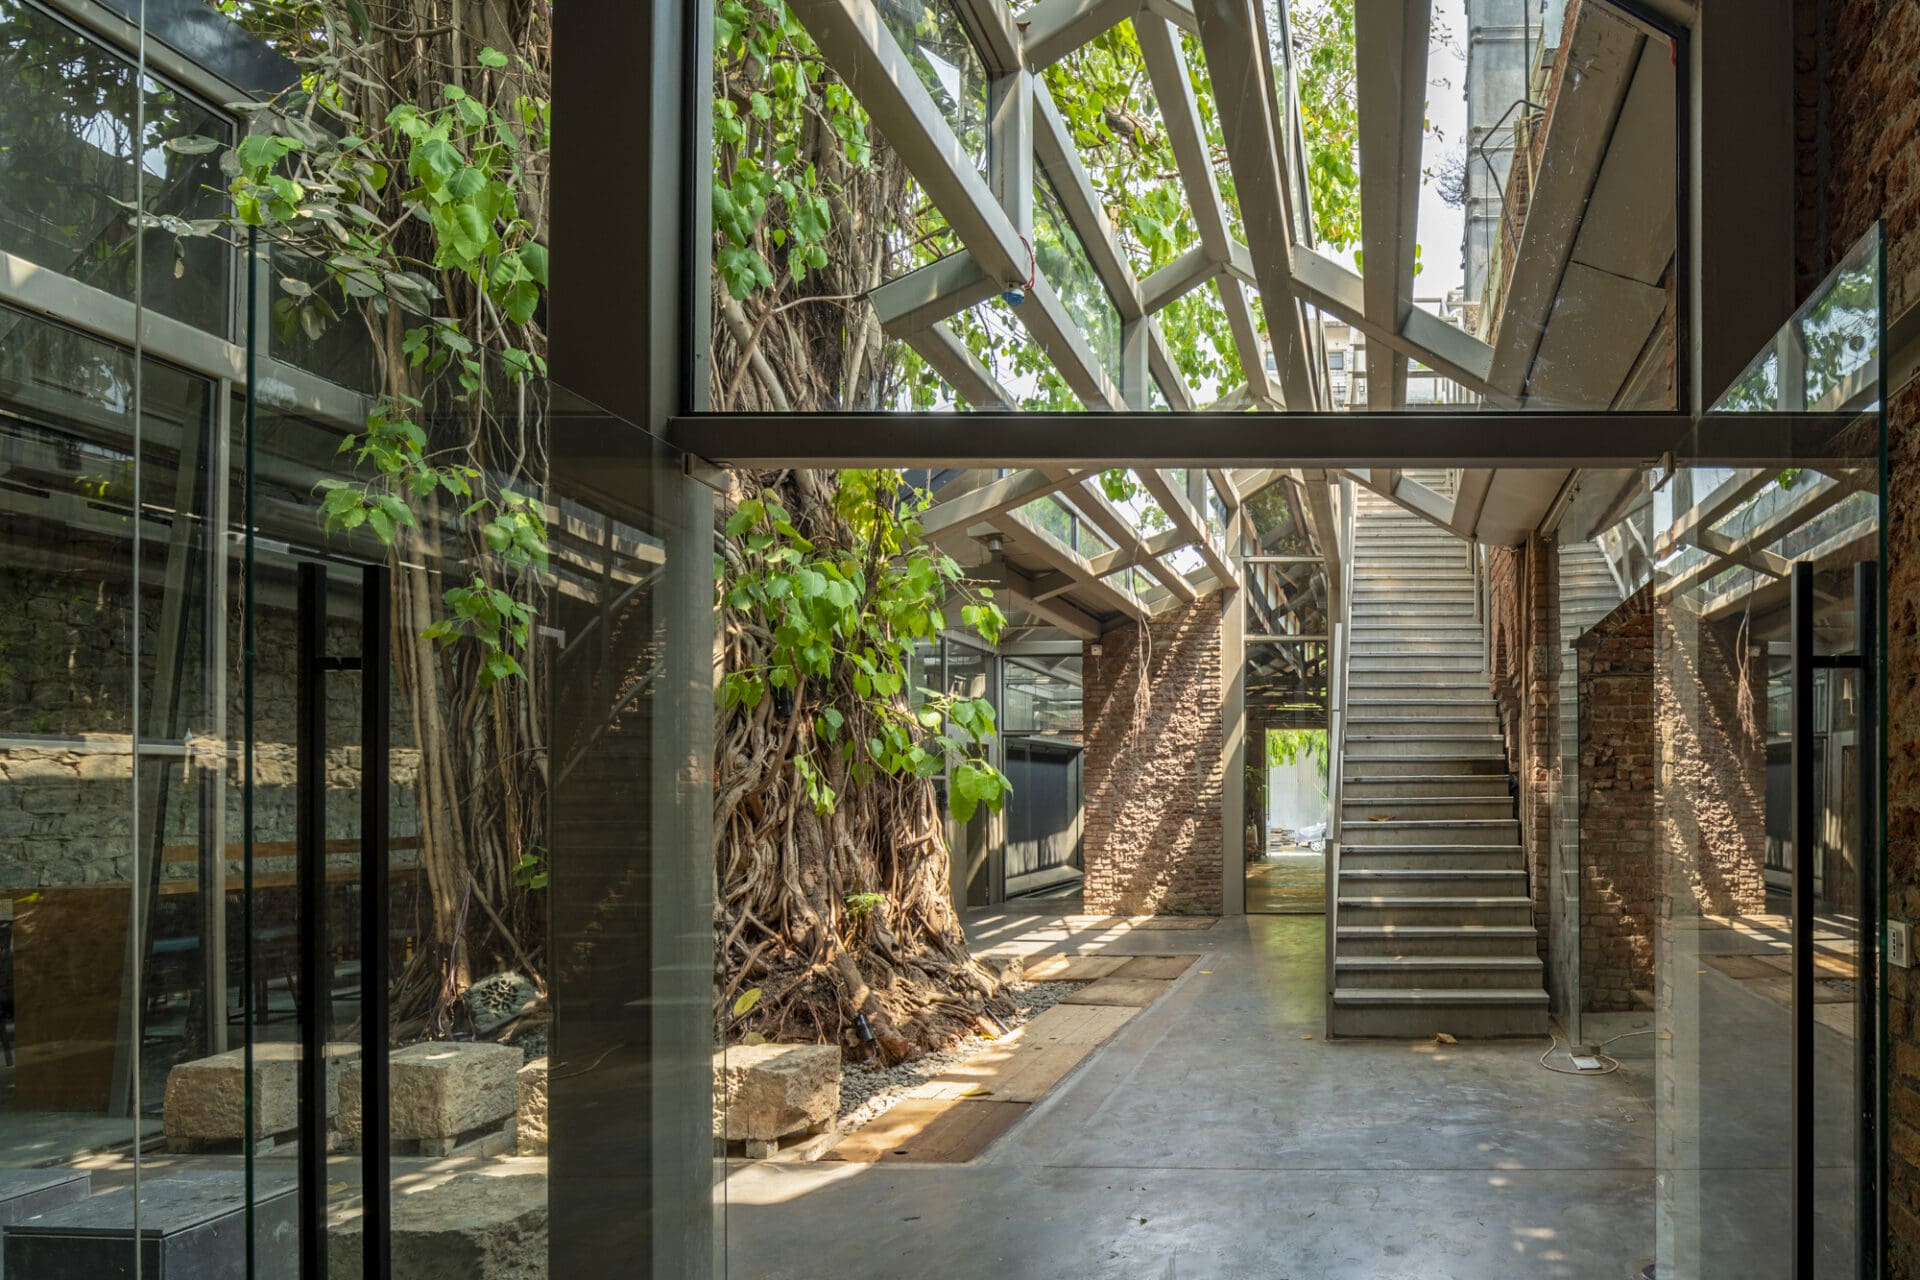 Best art galleries in Mumbai | A view through glass to the banyan tree courtyard at IF.BE art space in Mumbai